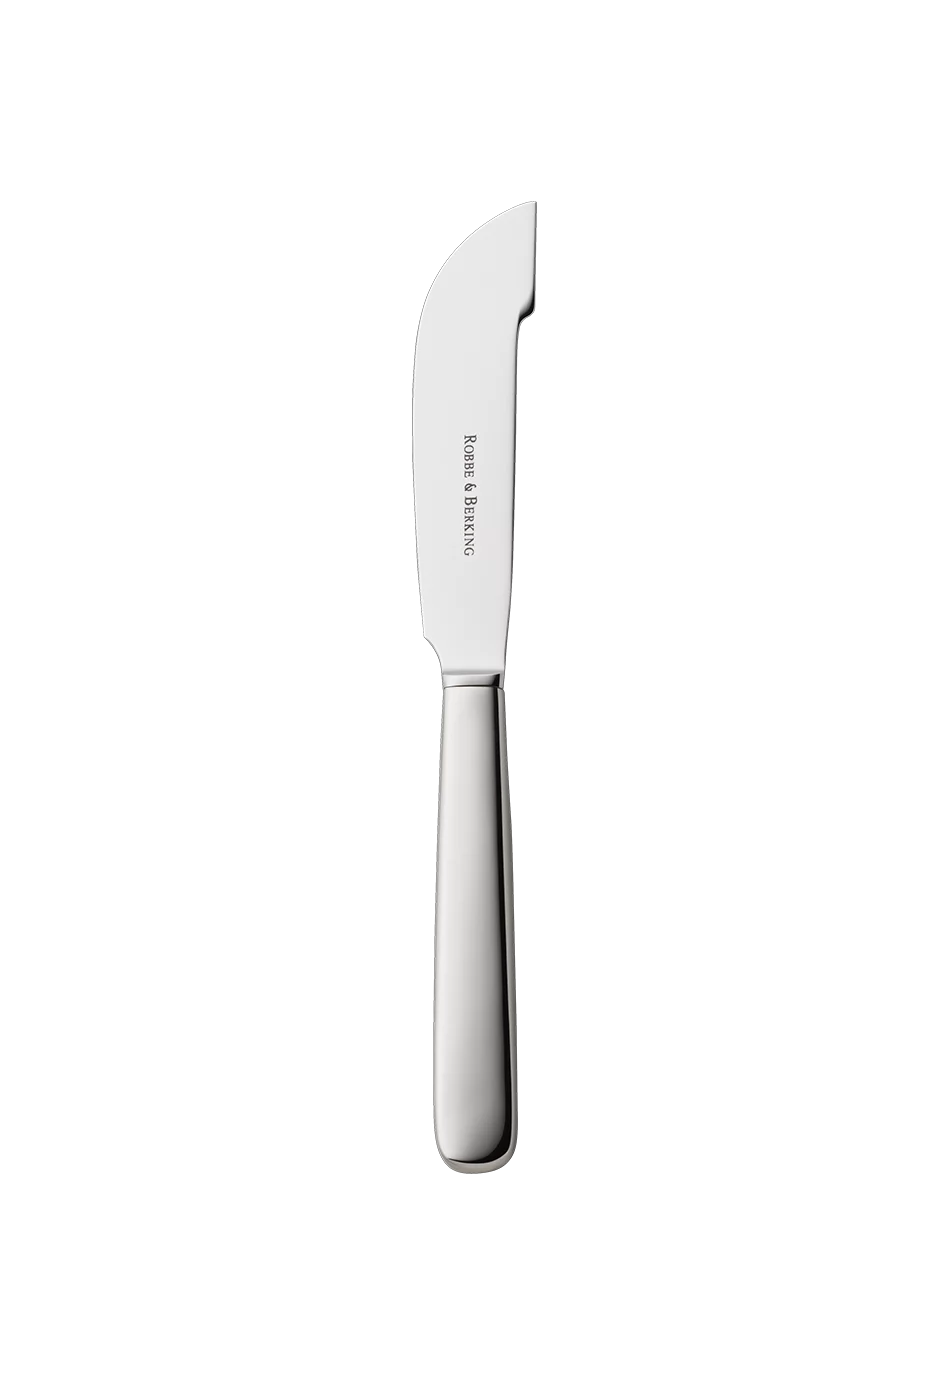 Atlantic Brillant Cheese Knife (18/8 stainless steel)